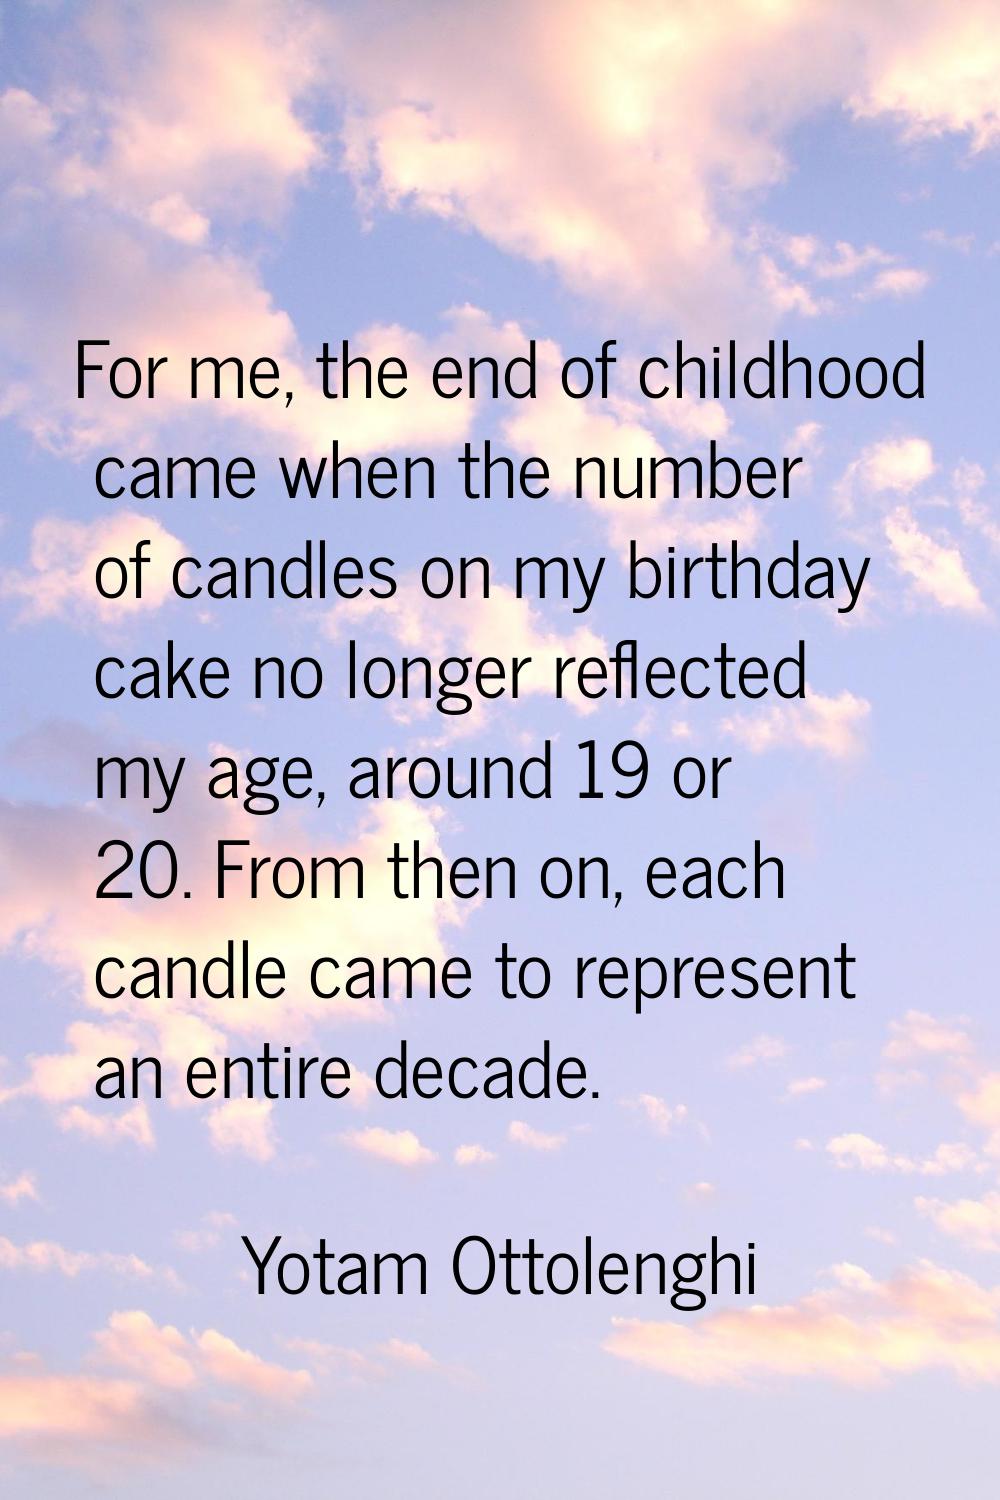 For me, the end of childhood came when the number of candles on my birthday cake no longer reflecte